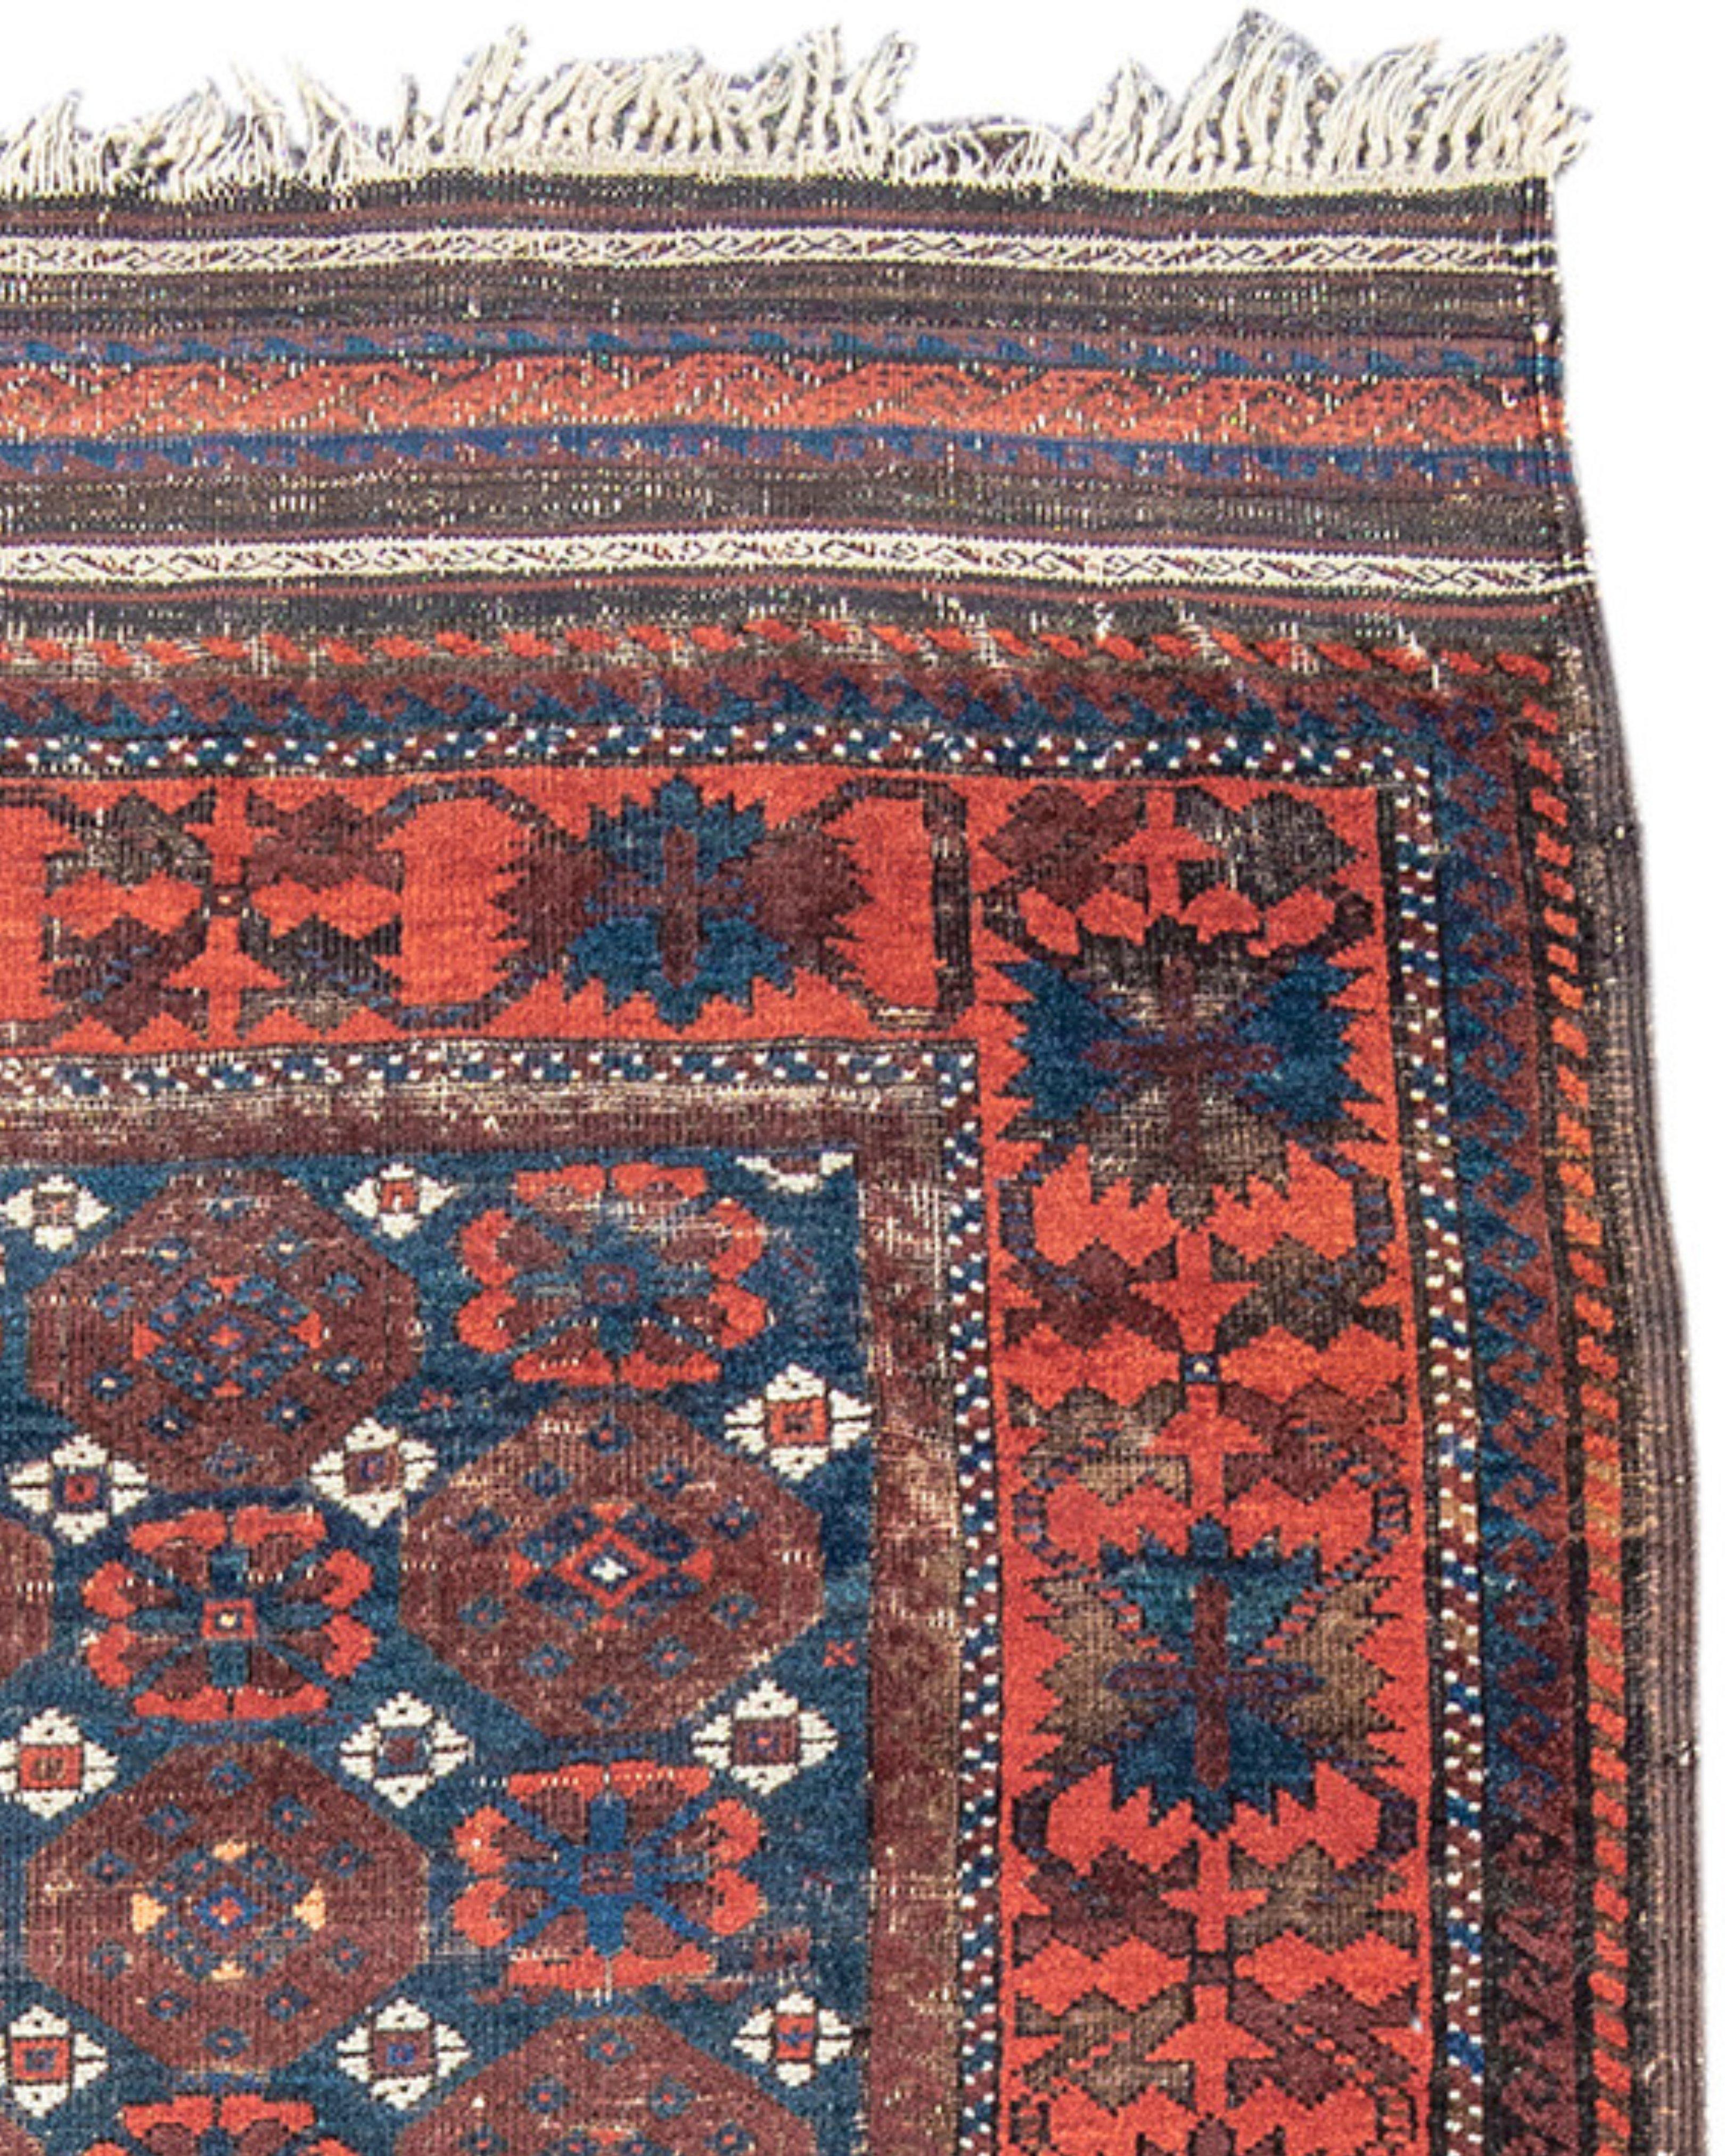 Antique Persian Baluch Rug, Late 19th Century

With a classic design type, this rug comes from northeast Iran. Known as a ‘mina khani’ design, it features stylized flower heads with smaller flowers in white arranged on an indigo blue field. The